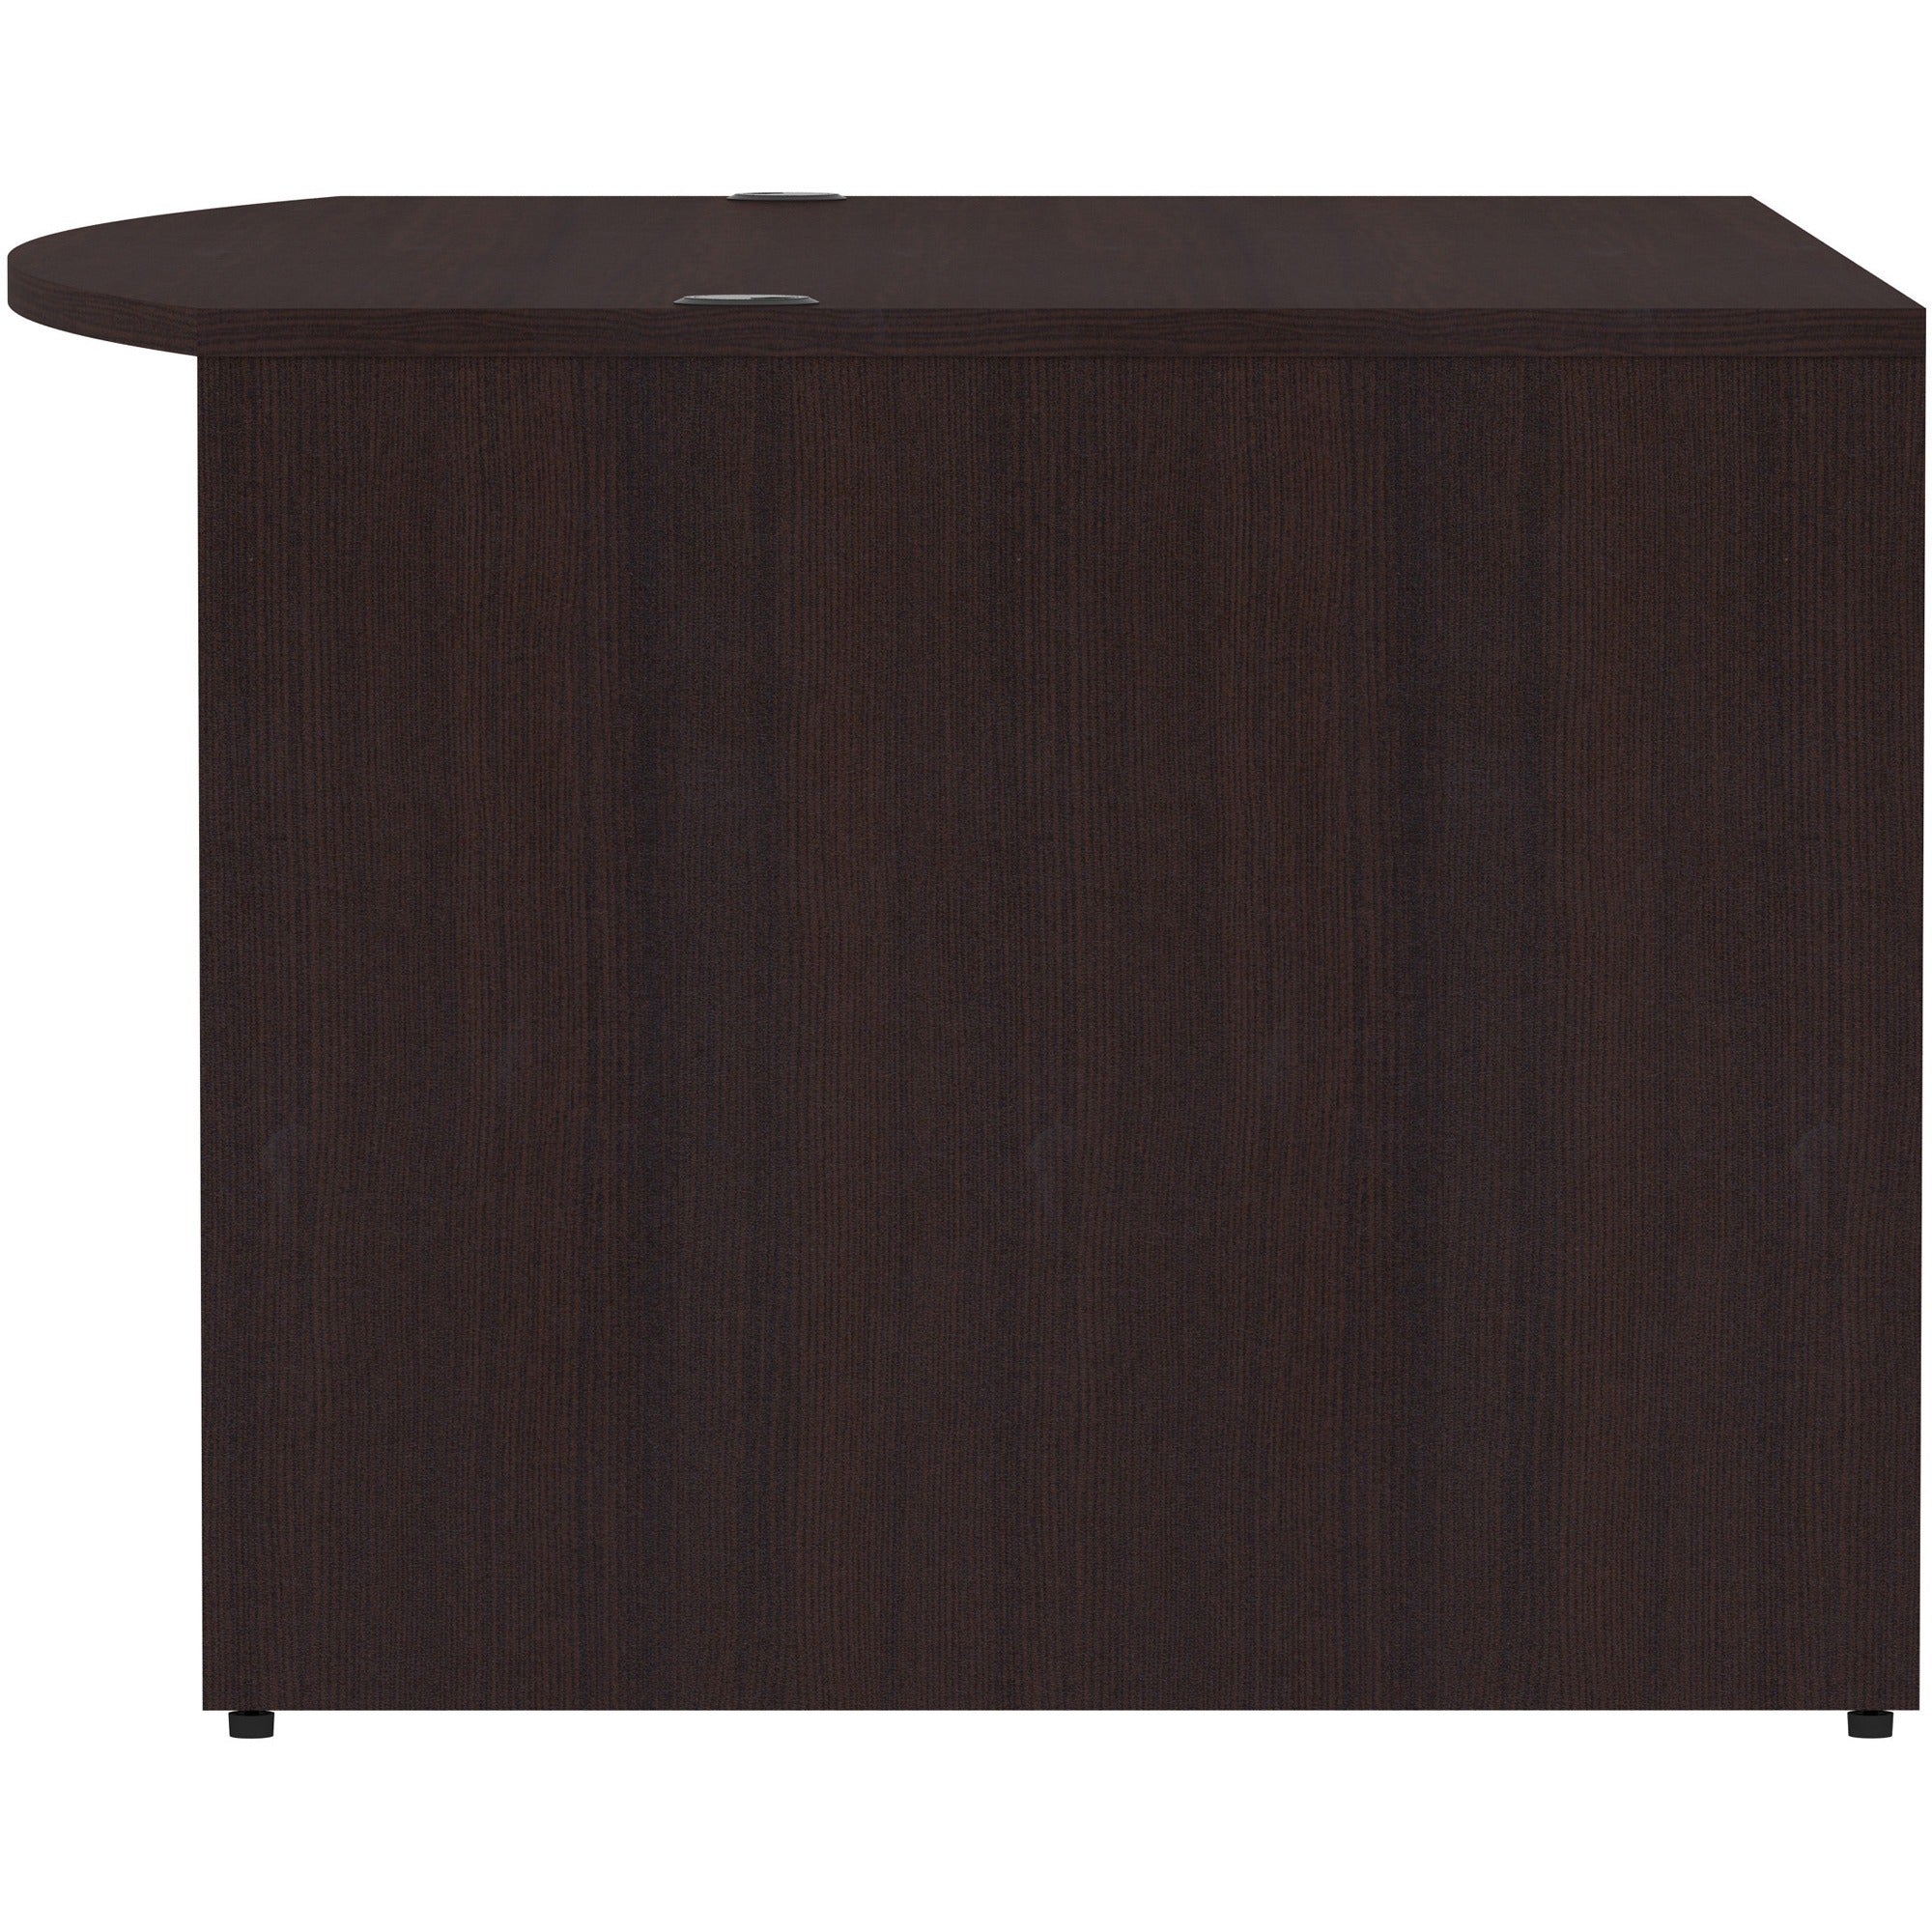 lorell-essentials-series-bowfront-desk-shell-72-x-414295-desk-shell-1-top-bow-front-edge-finish-espresso-laminate_llr18260 - 4